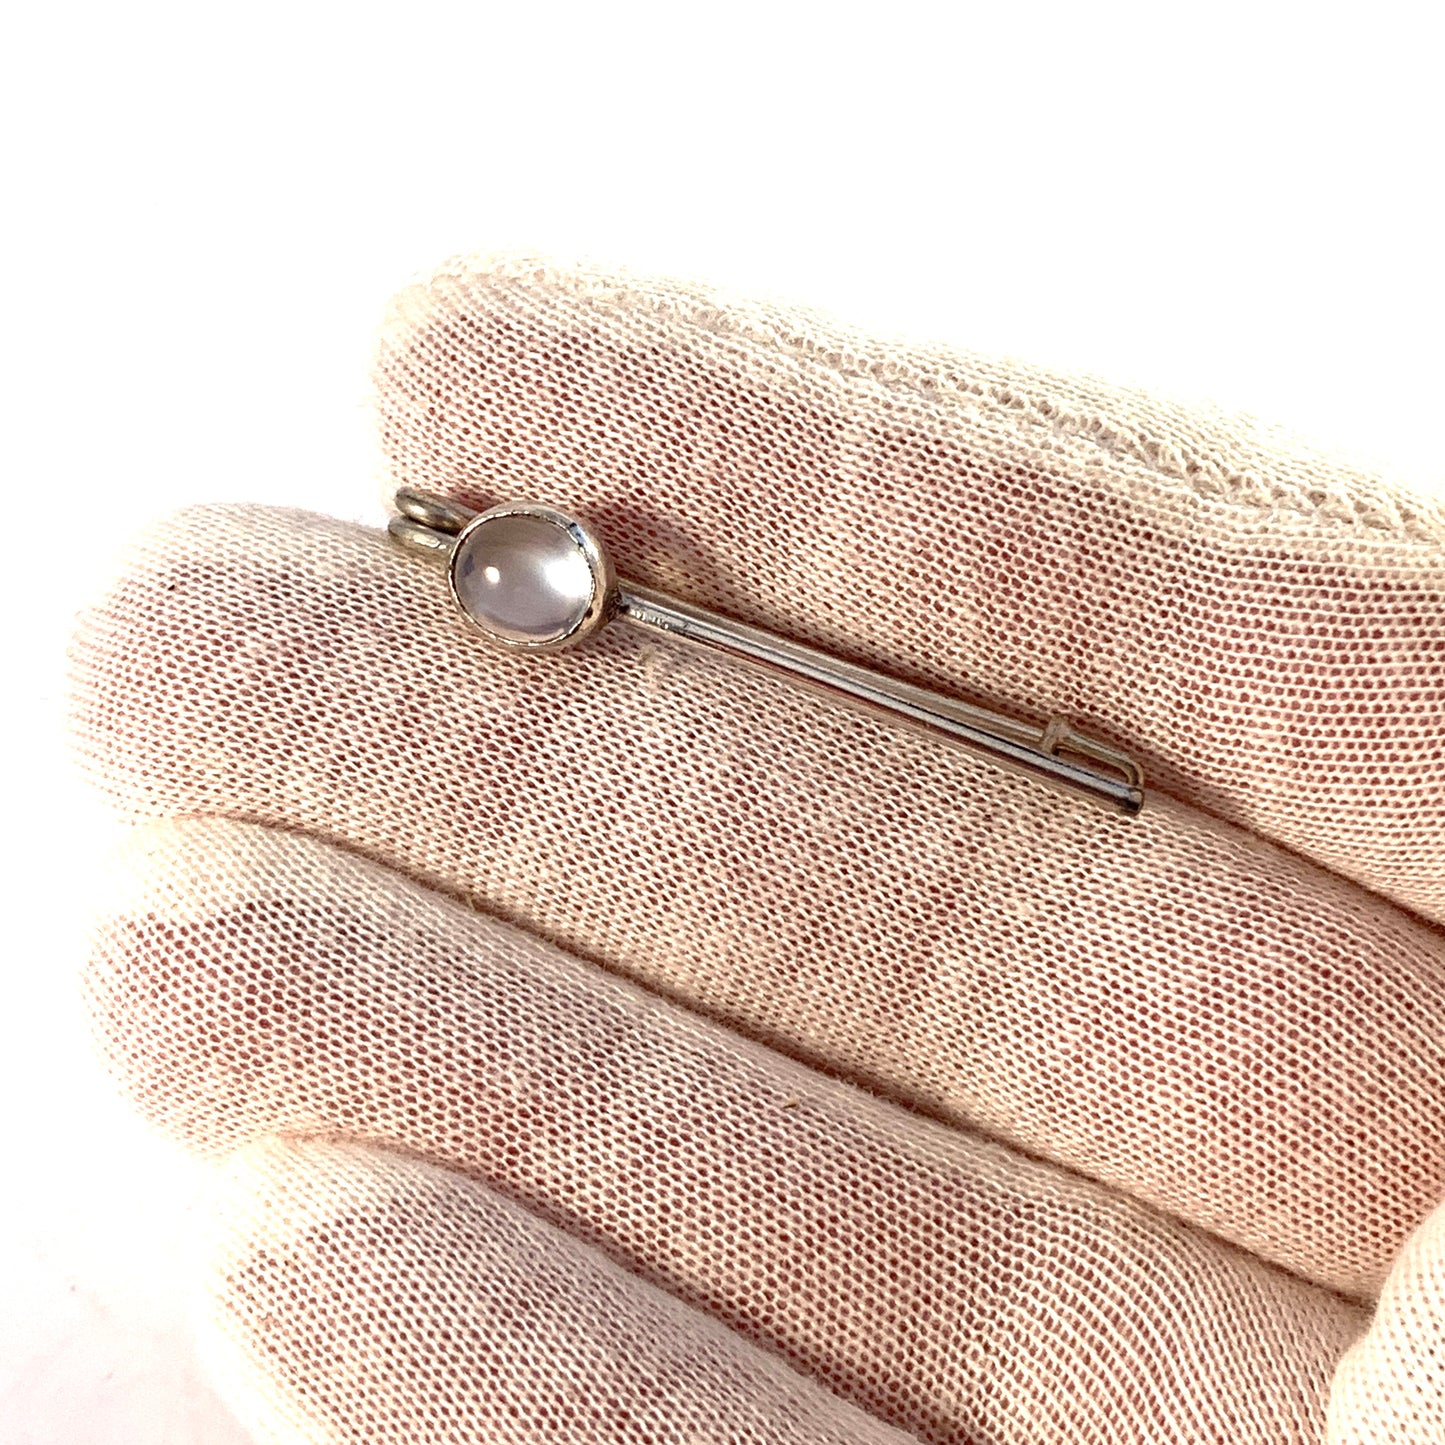 Antique 1910-20s Solid Silver Moonstone Pin.